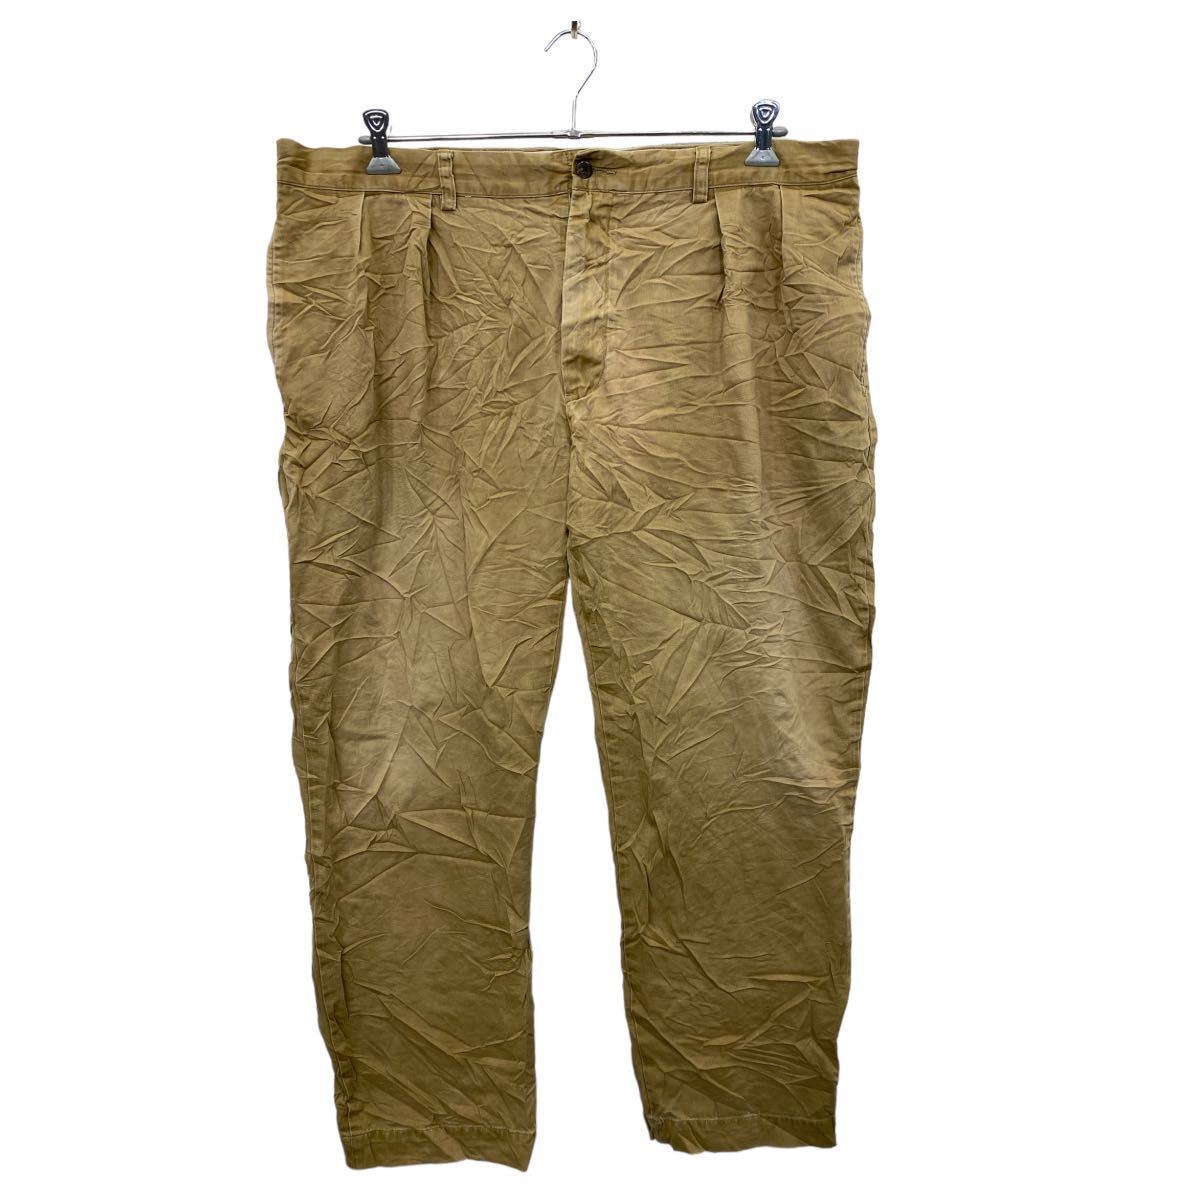 Polo Ralph Lauren chino pants W40 Polo Ralph Lauren tuck entering cotton big size Camel old clothes . America buying up 2402-237